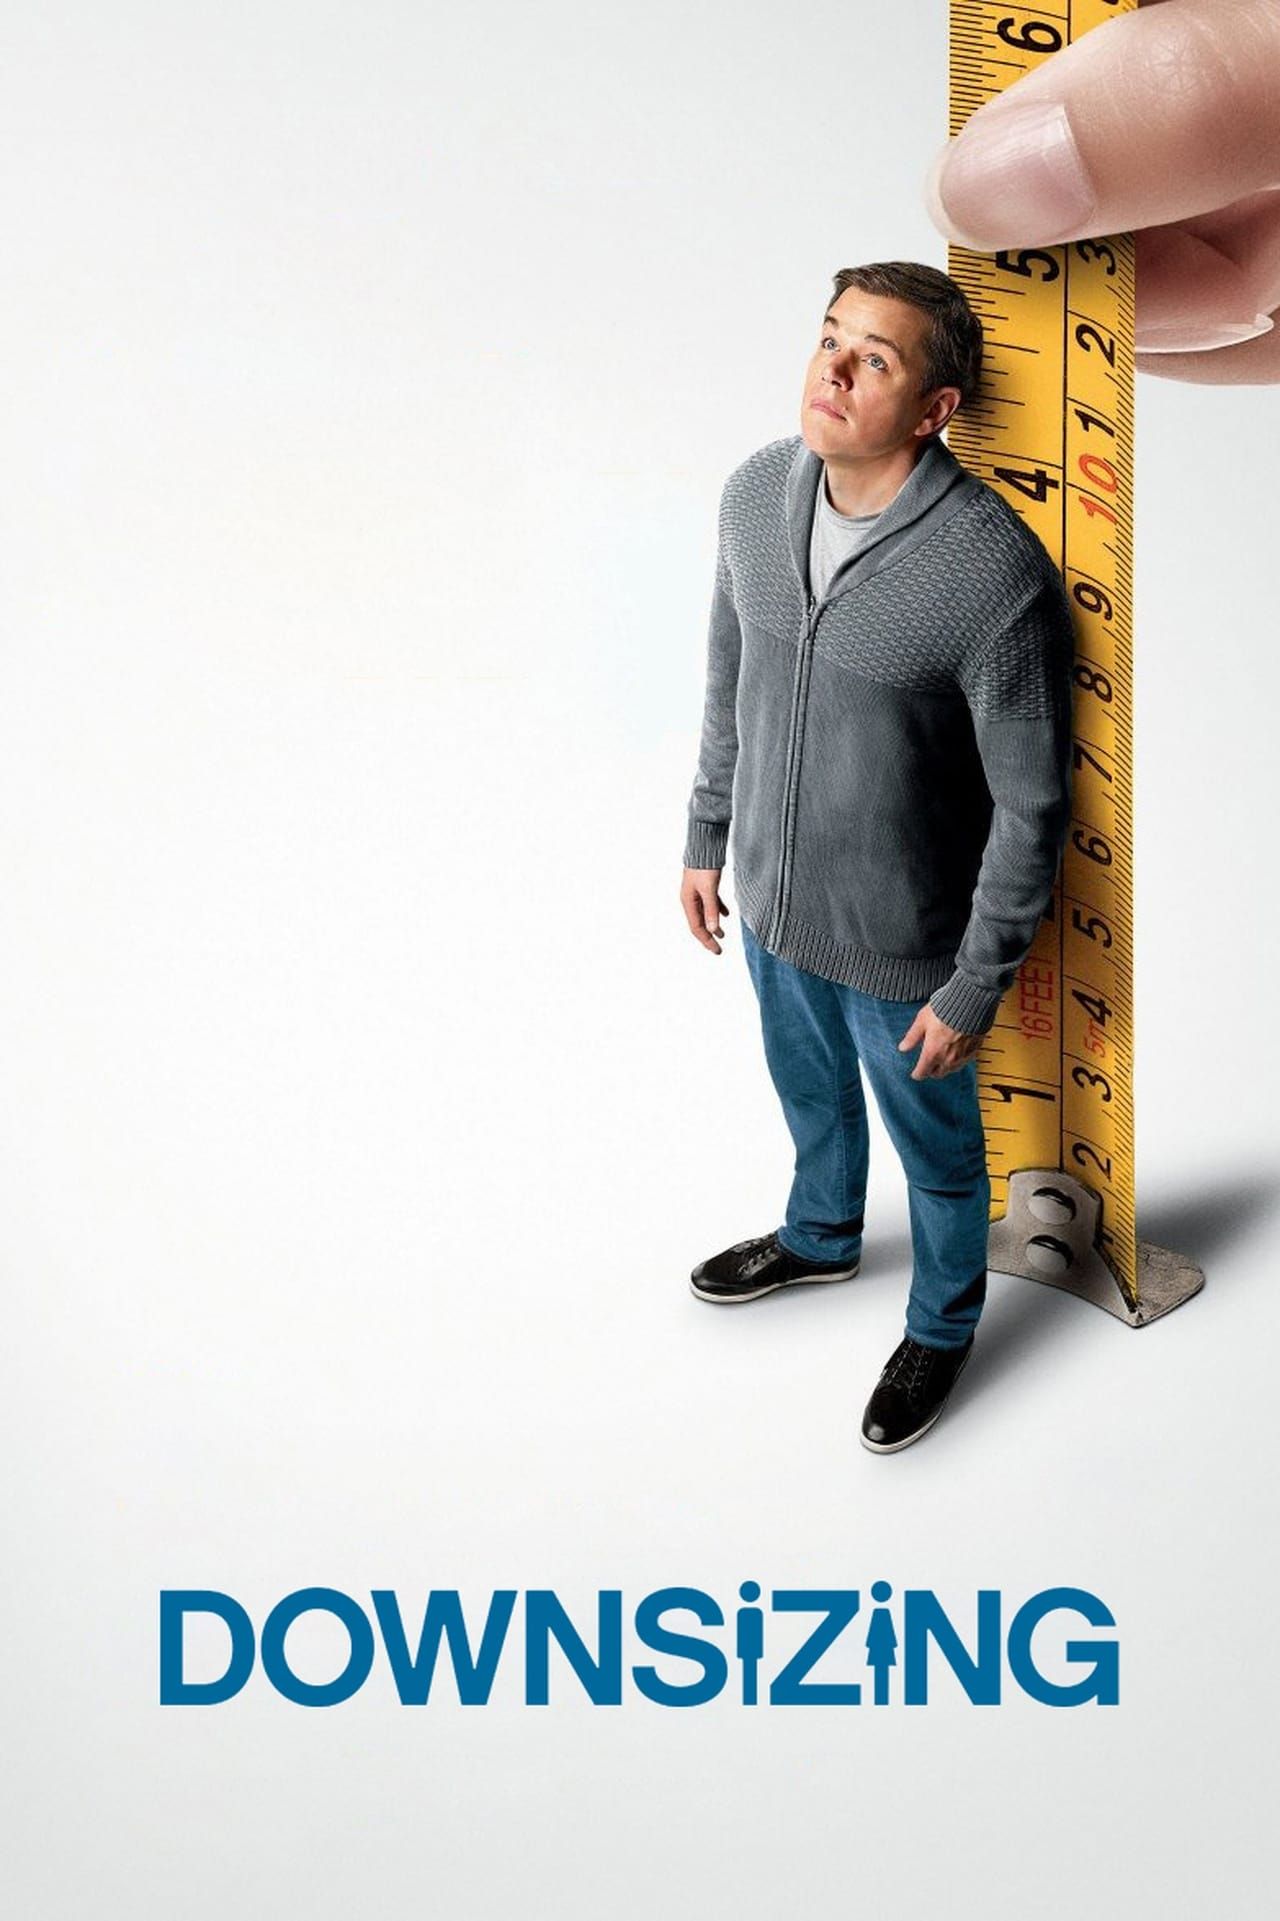 Downsizing (2017) Hindi Dubbed Movie download full movie